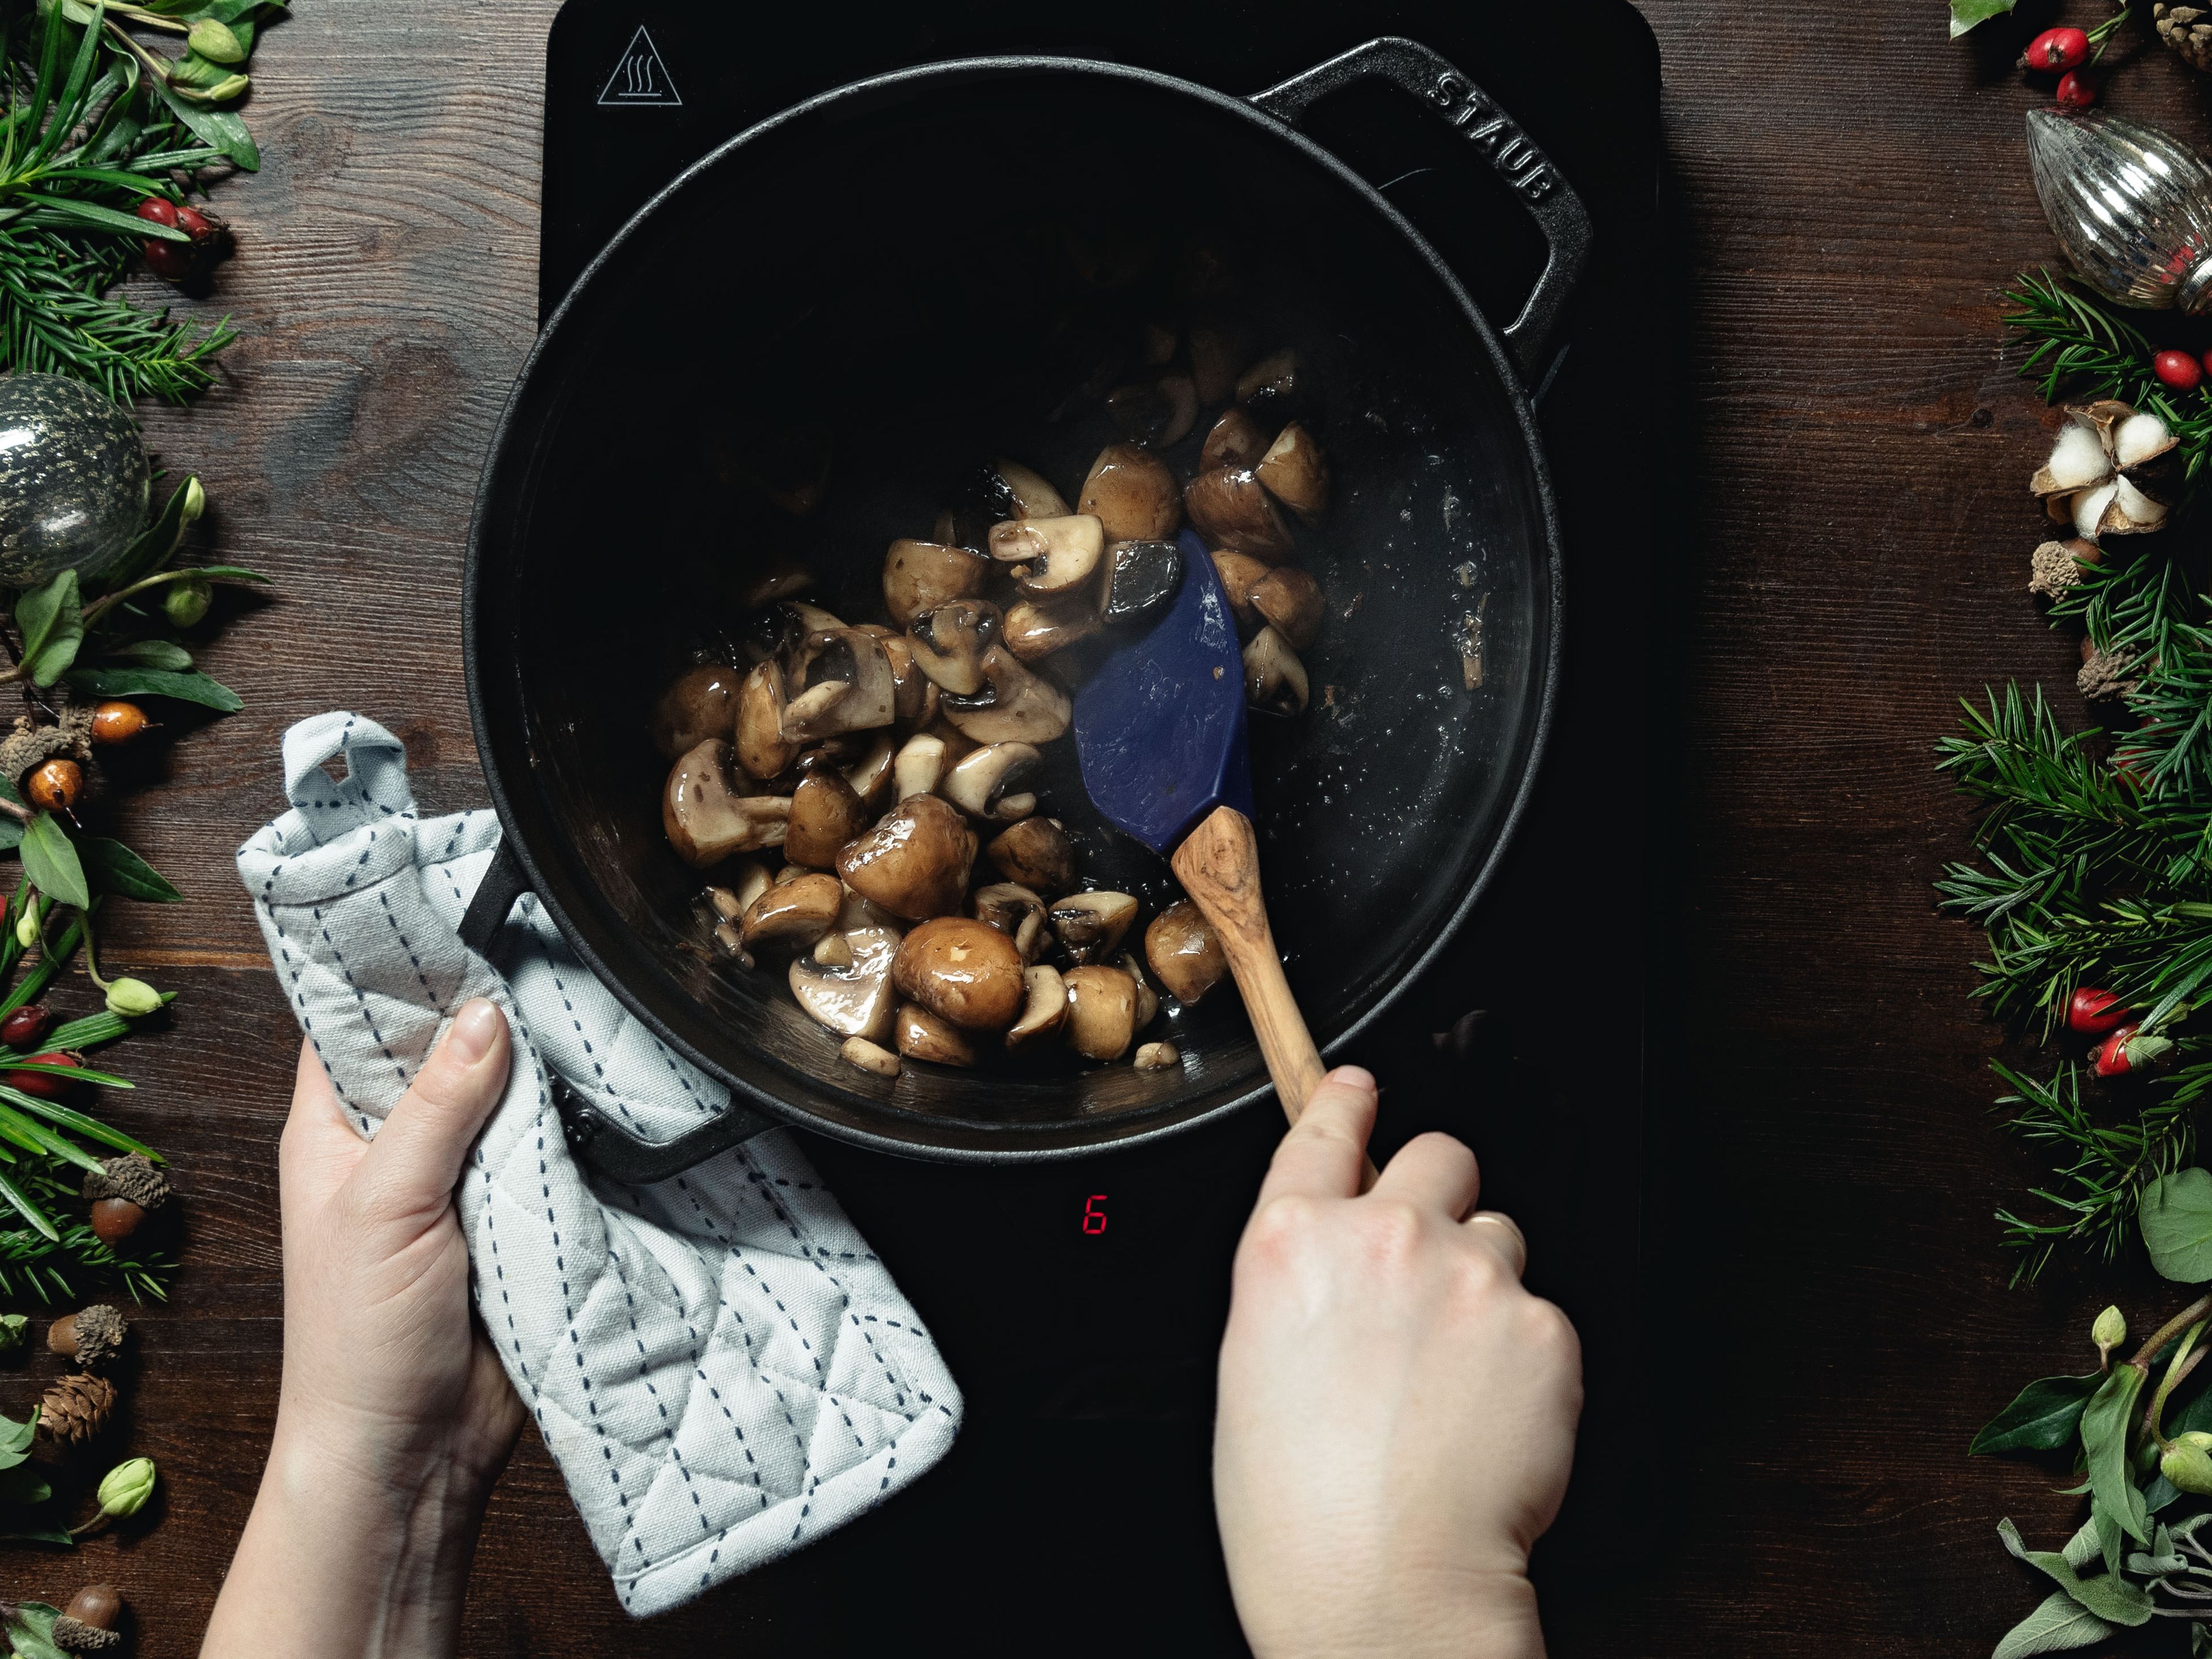 Preheat the oven to 200°C/390°F. Quarter the brown mushrooms. Peel the carrots, shallots, and garlic cloves then dice and set aside. Dice the bacon. Set a large ovenproof pot over medium heat and add vegetable oil and mushrooms and let cook for approx. 5 min. Remove and set aside.